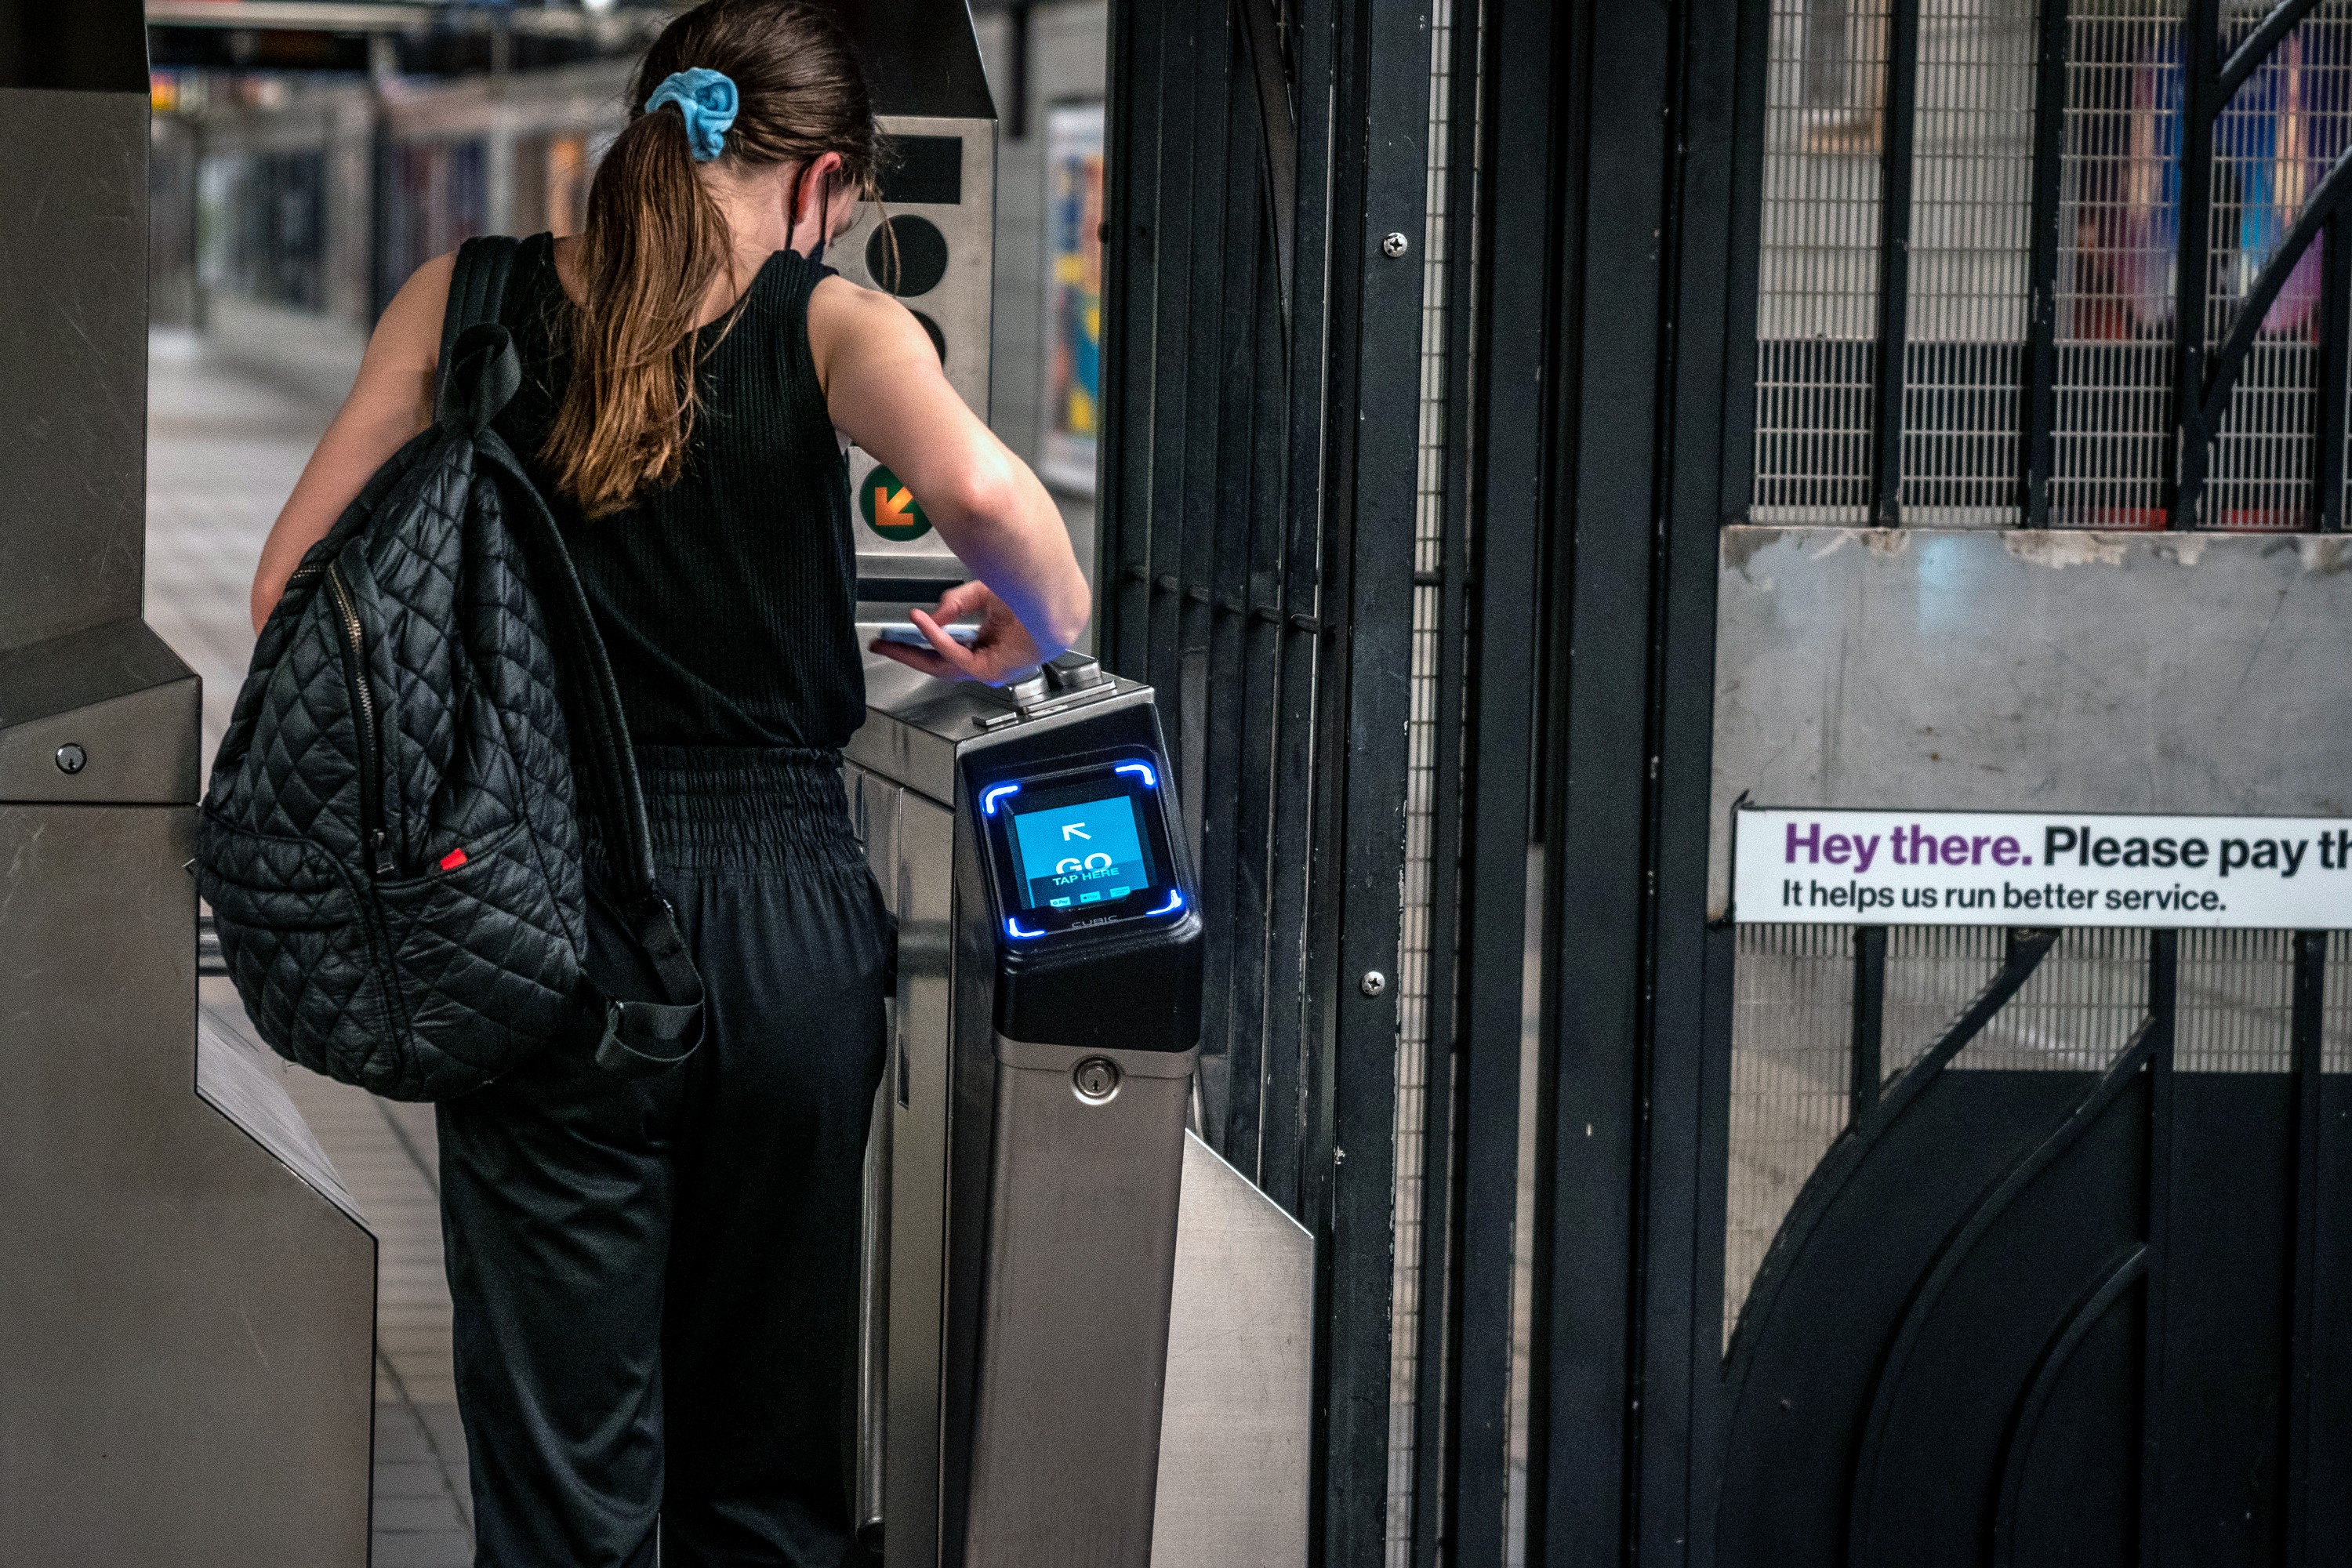 A commuter taps her phone on an OMNY pad at TimesSq-42 Street, Oct. 24, 2020.